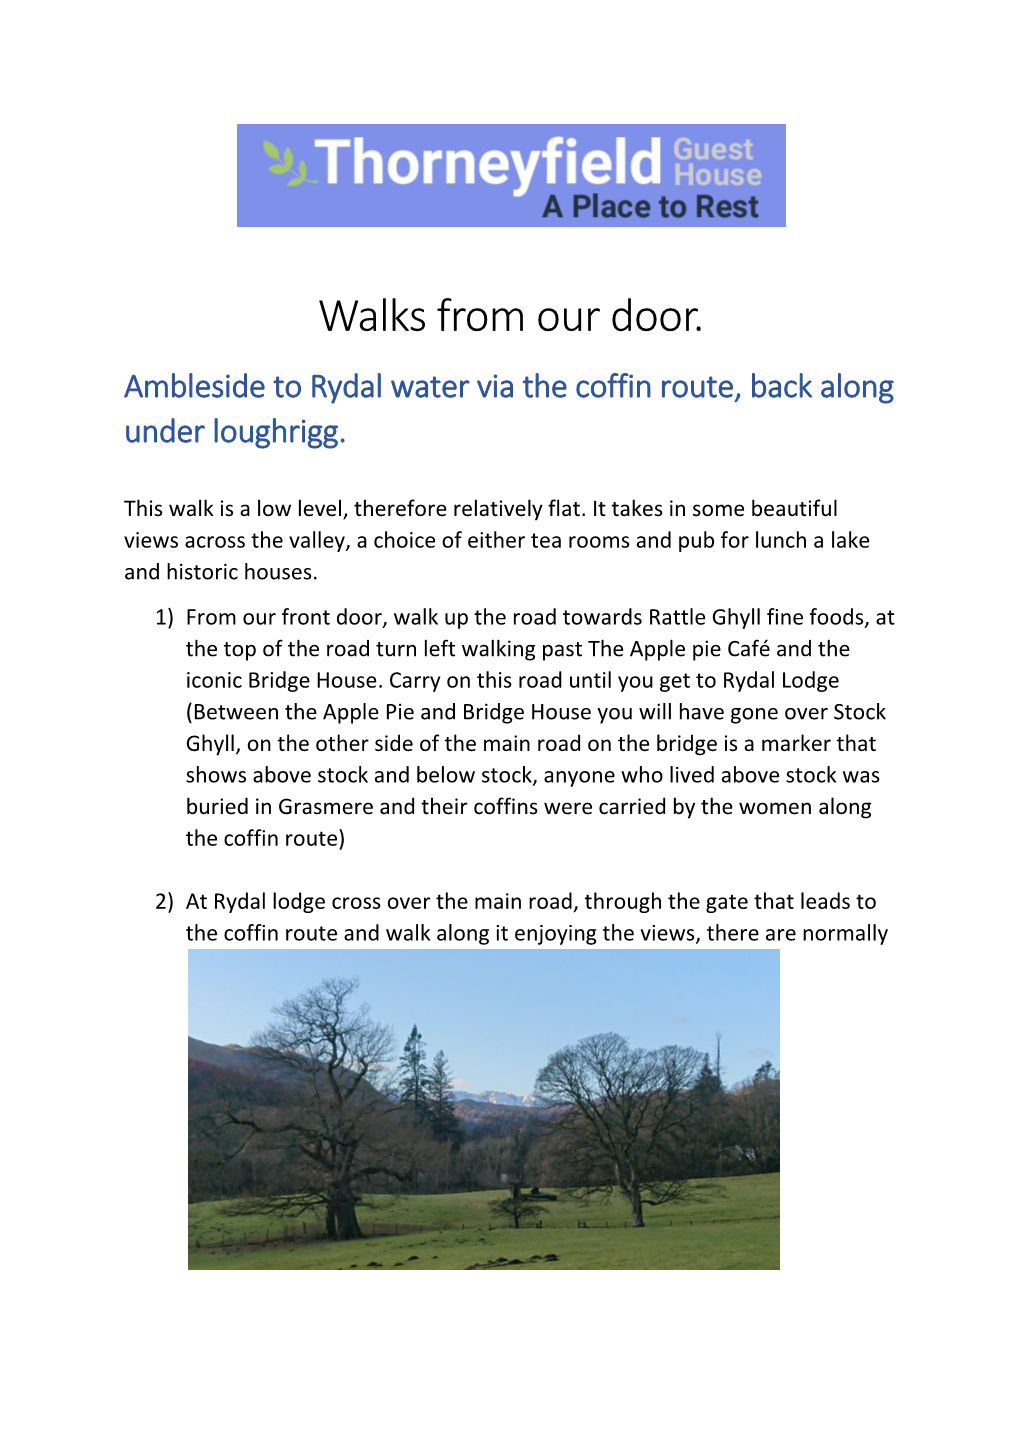 Walks from Our Door. Ambleside to Rydal Water Via the Coffin Route, Back Along Under Loughrigg